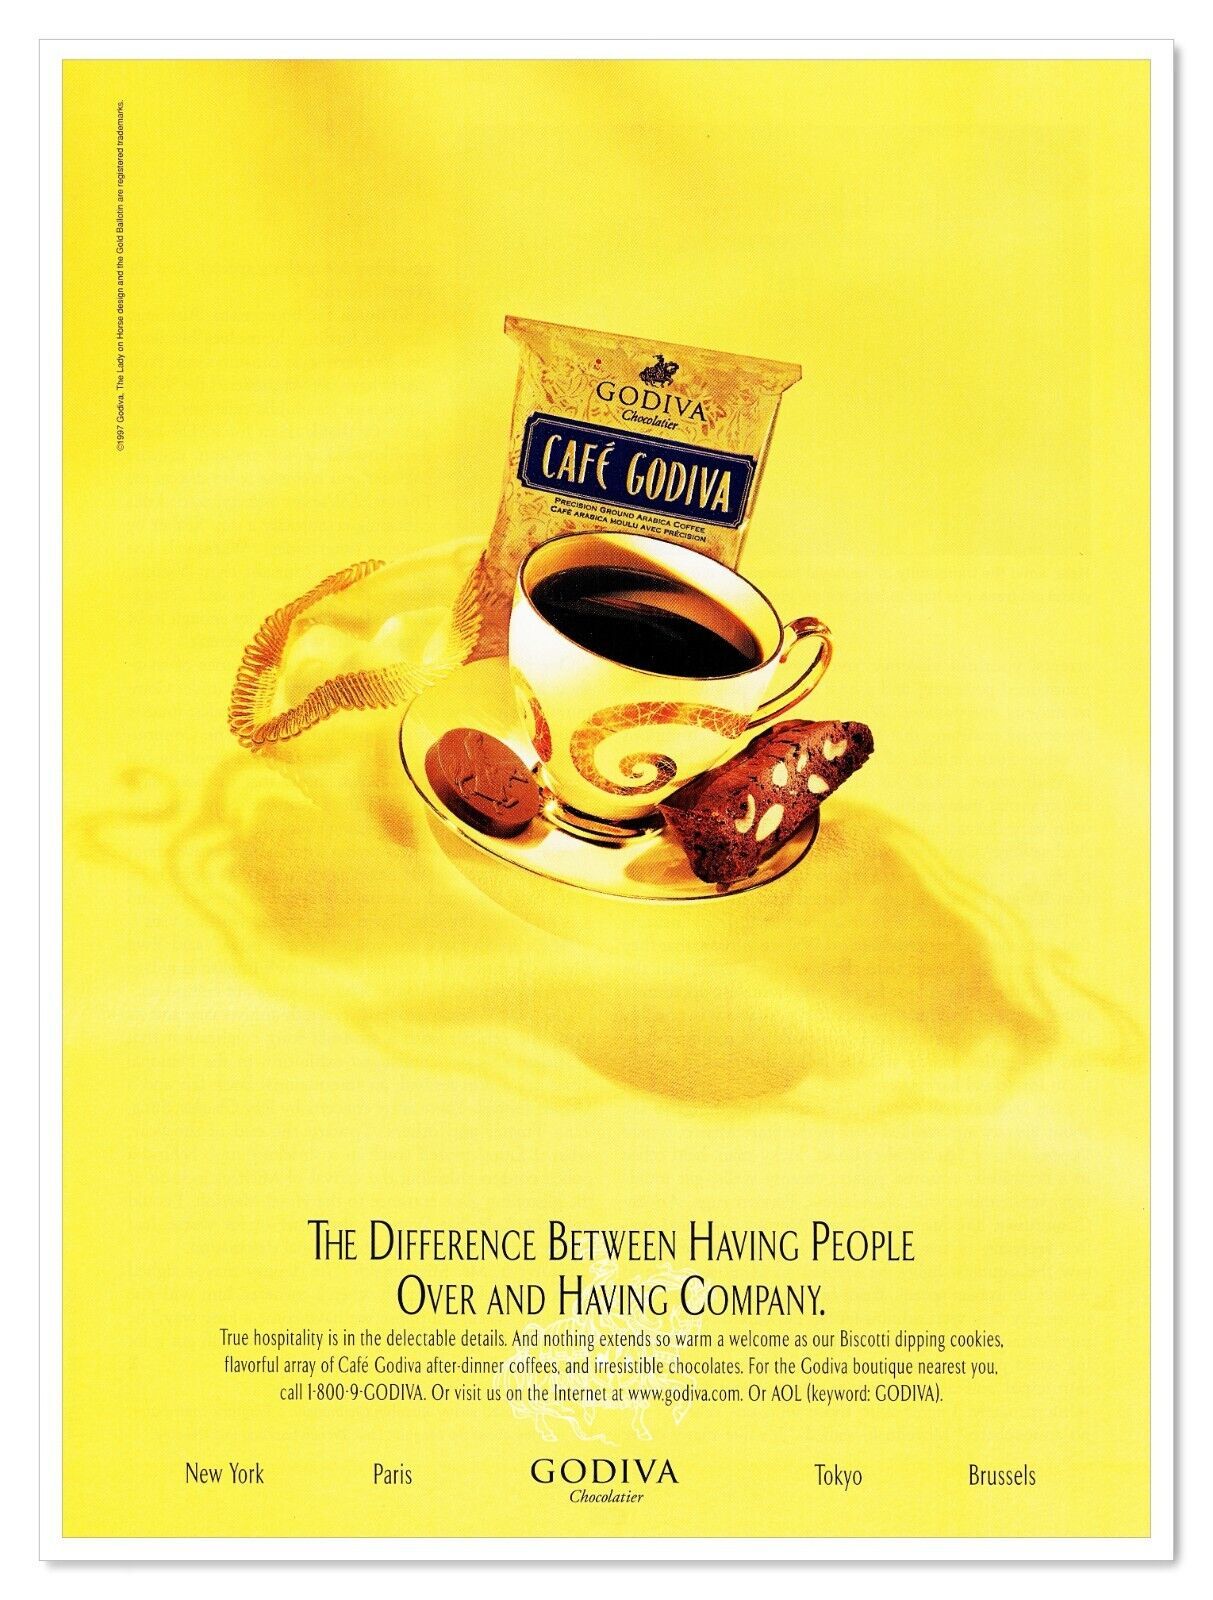 Primary image for Godiva Chocolatier Biscotti Dipping Cookies Vintage 1997 Full-Page Magazine Ad